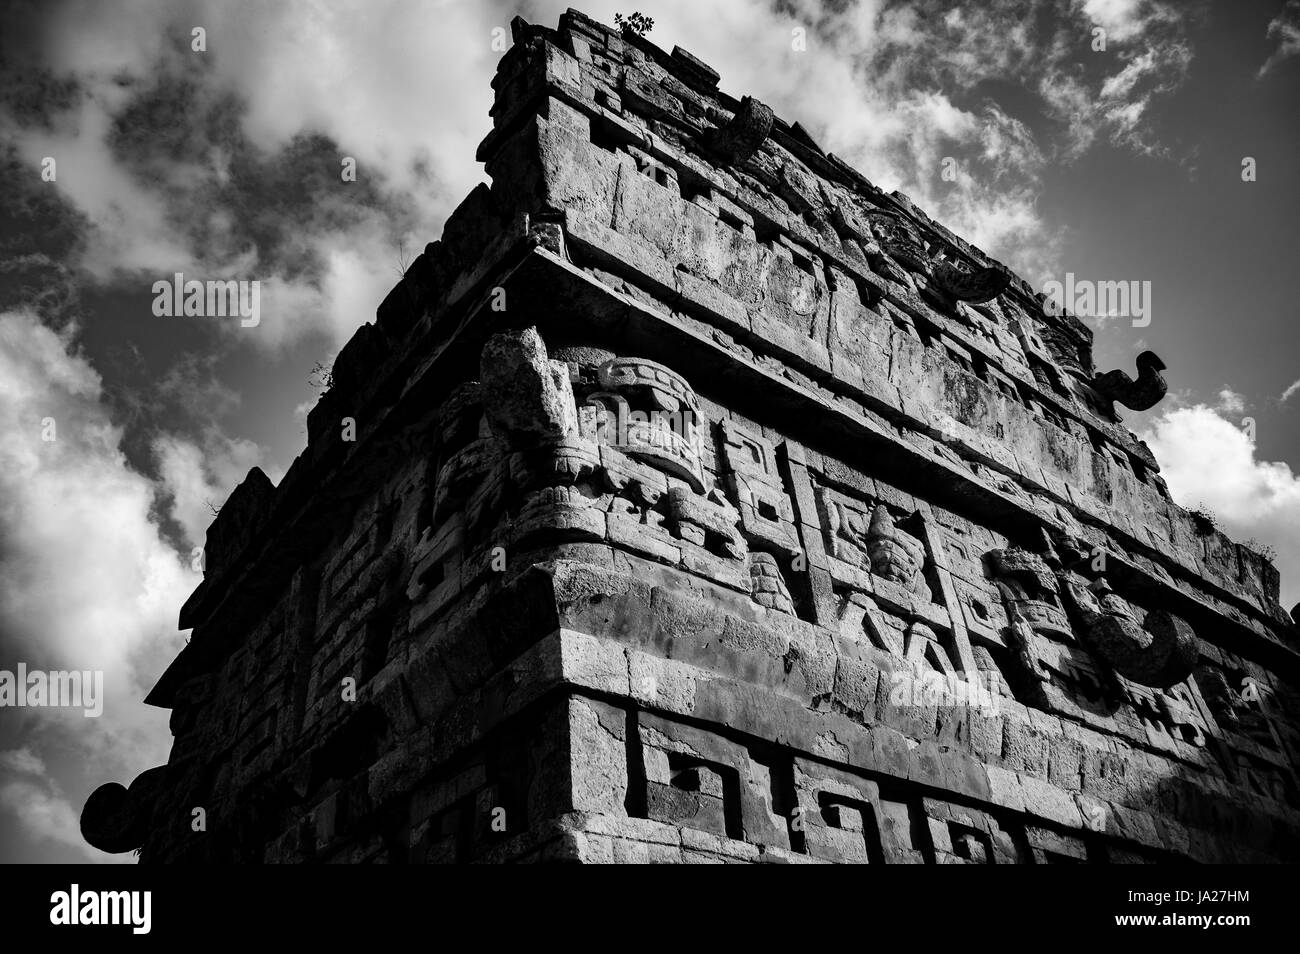 The Mayan ruins of Chichen Itza, a UNESCO World Heritage site, in the Yucatán state of Mexico Stock Photo